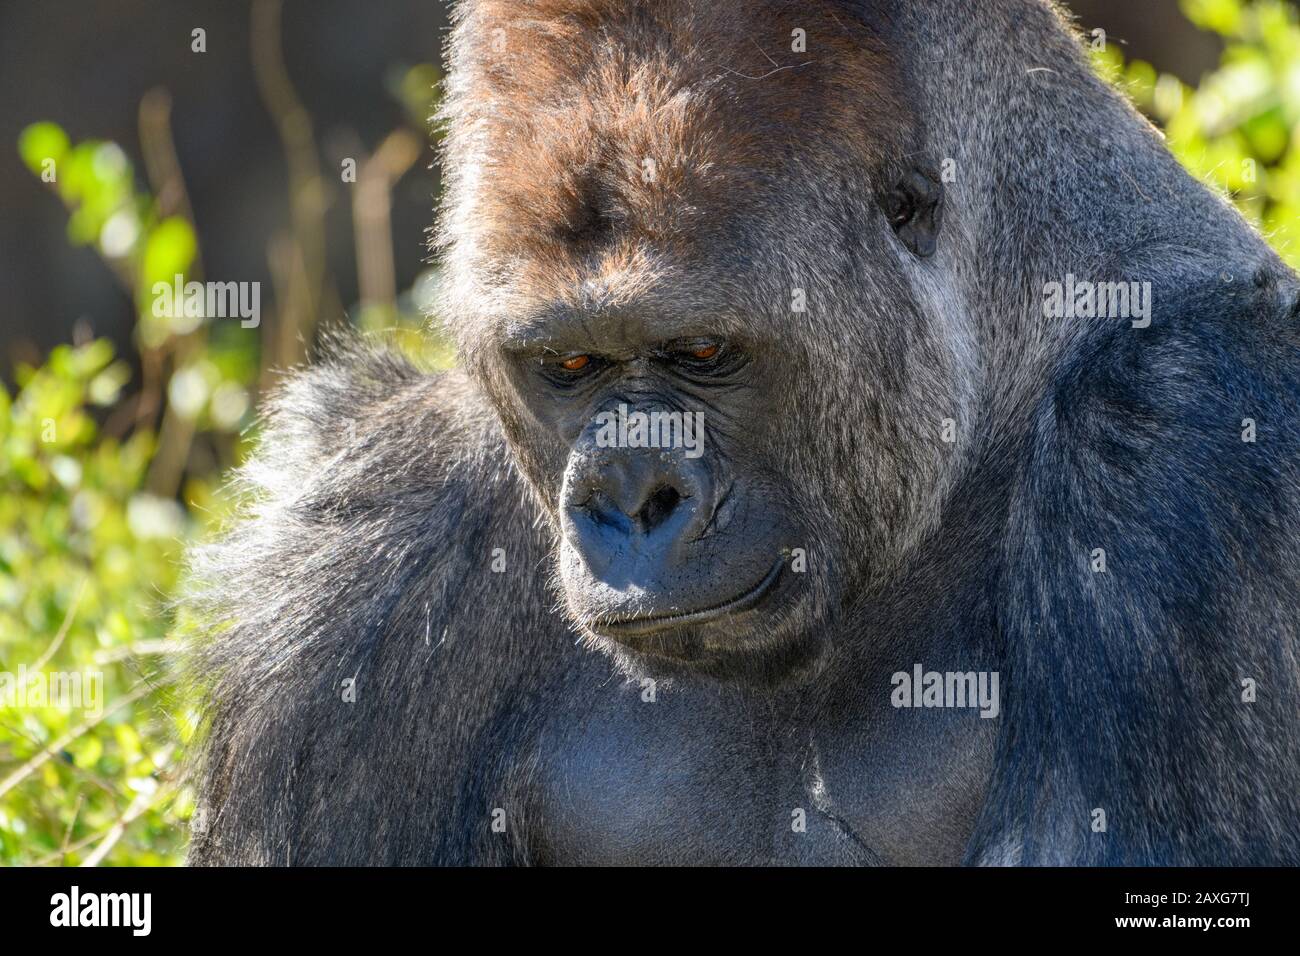 western Lowland Gorilla (Gorilla, gorilla, gorilla) with pouting look on face Stock Photo